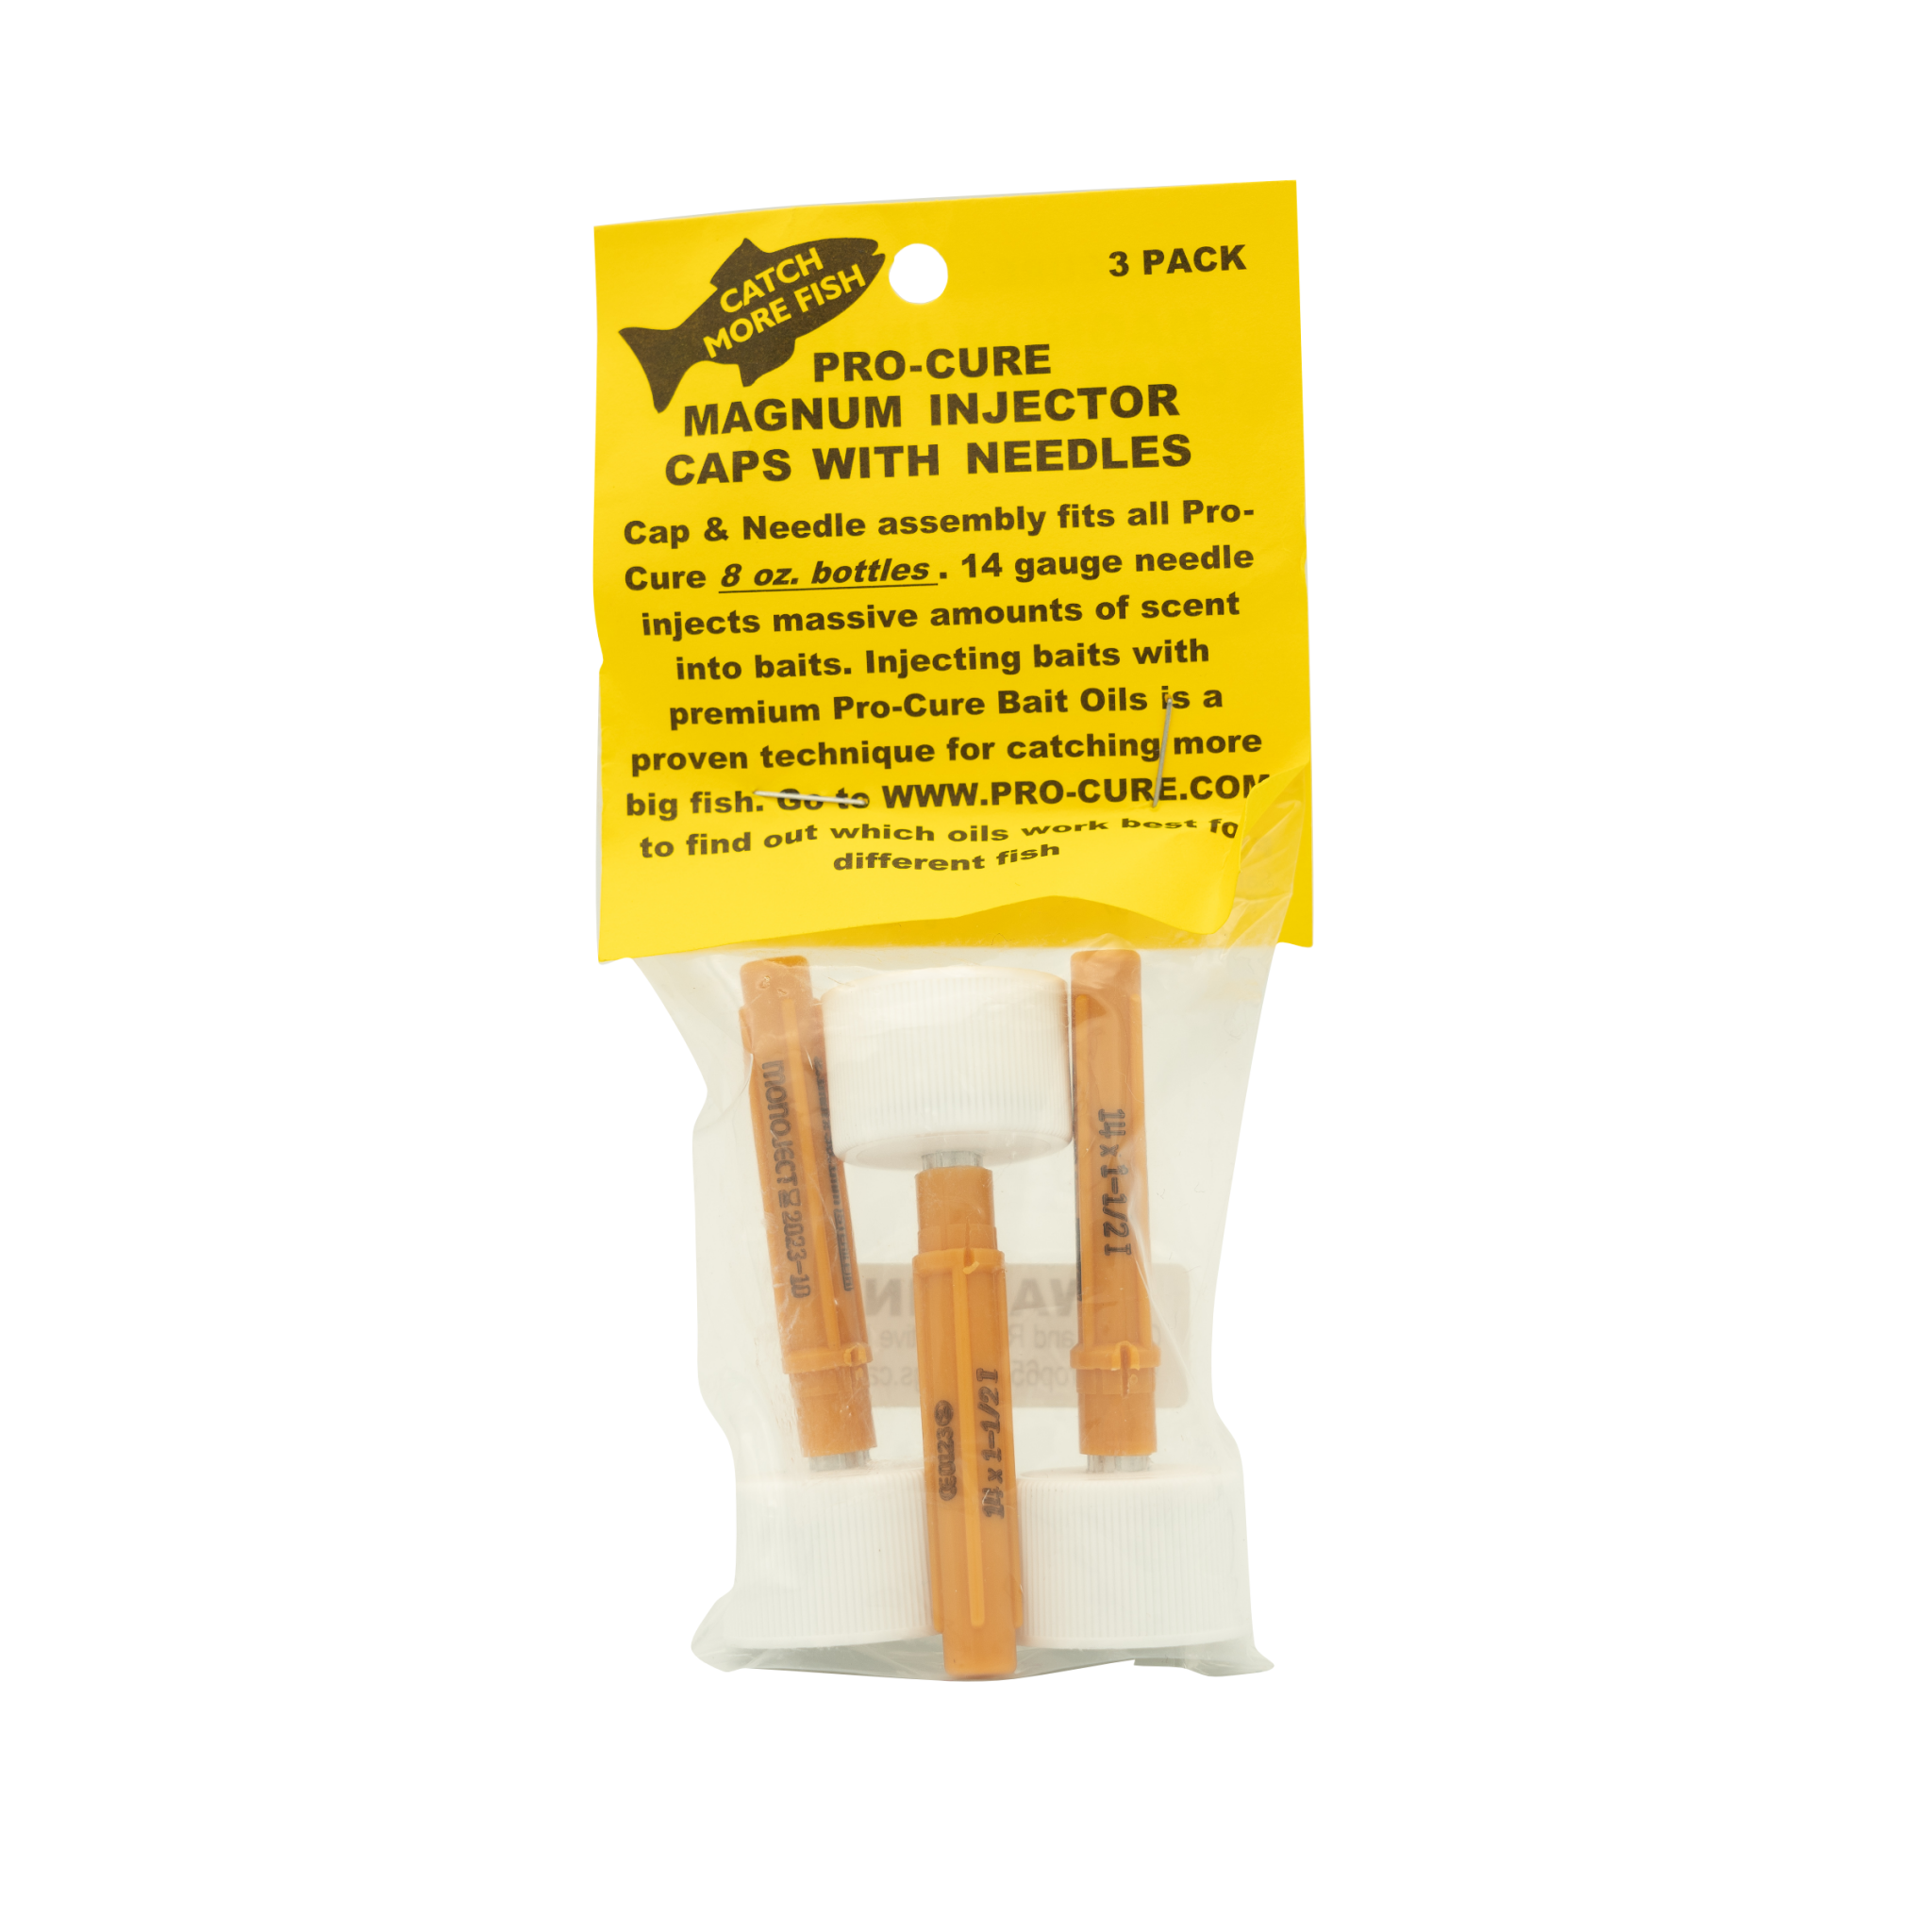 MAGNUM BAIT INJECTOR 8 OZ. WITH NEEDLES – Pro-Cure, Inc